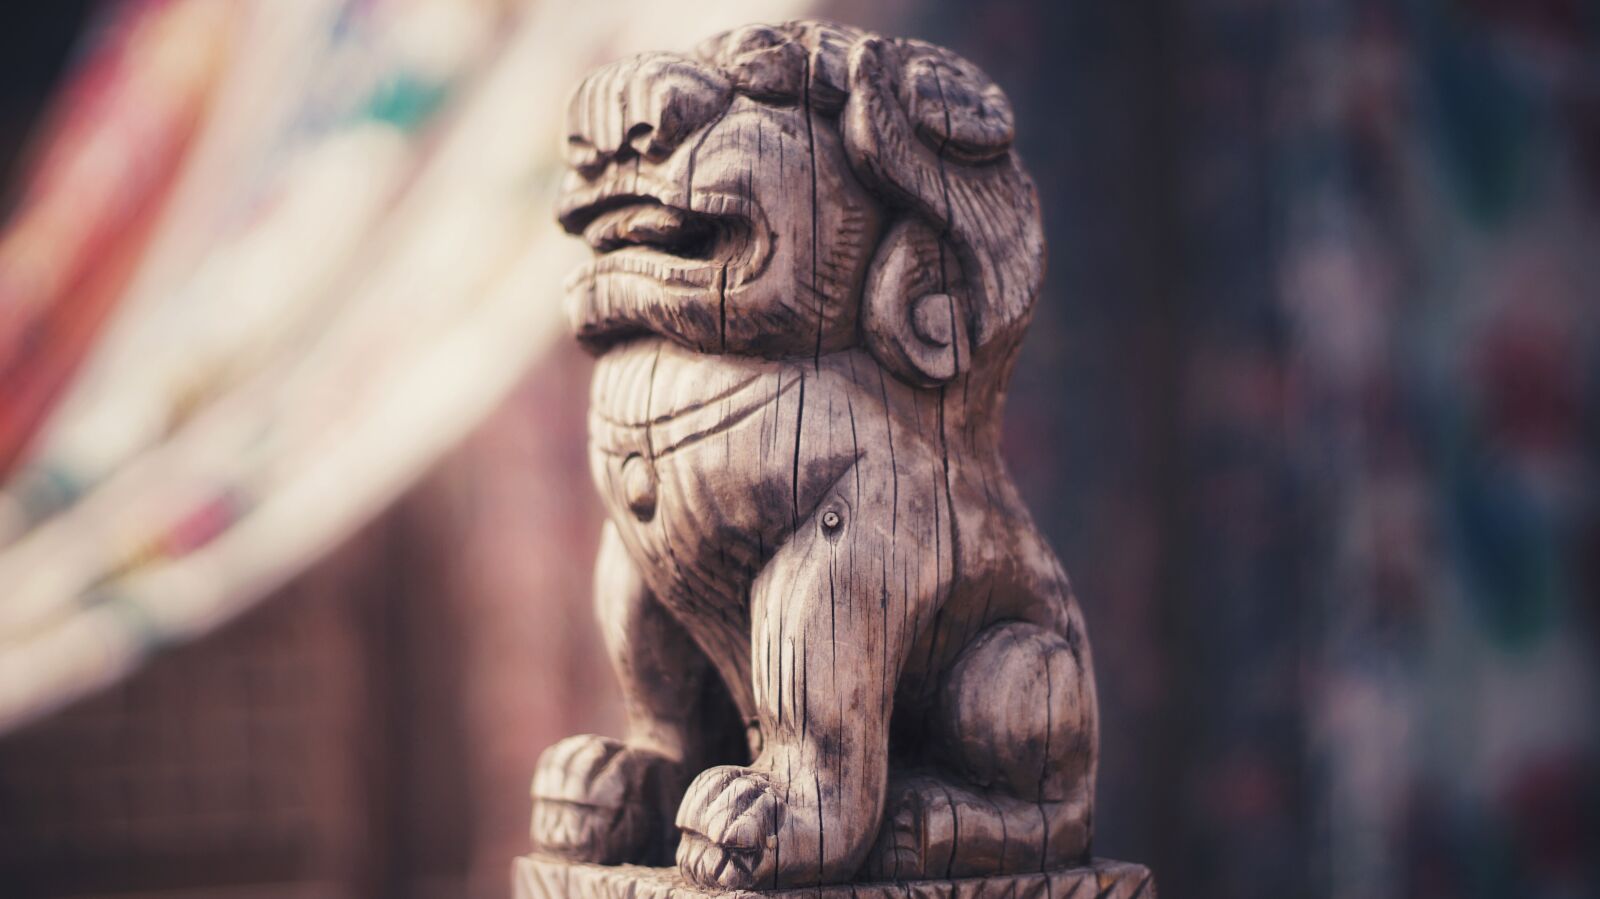 Sony a6000 sample photo. Lion, sculpture, small town photography